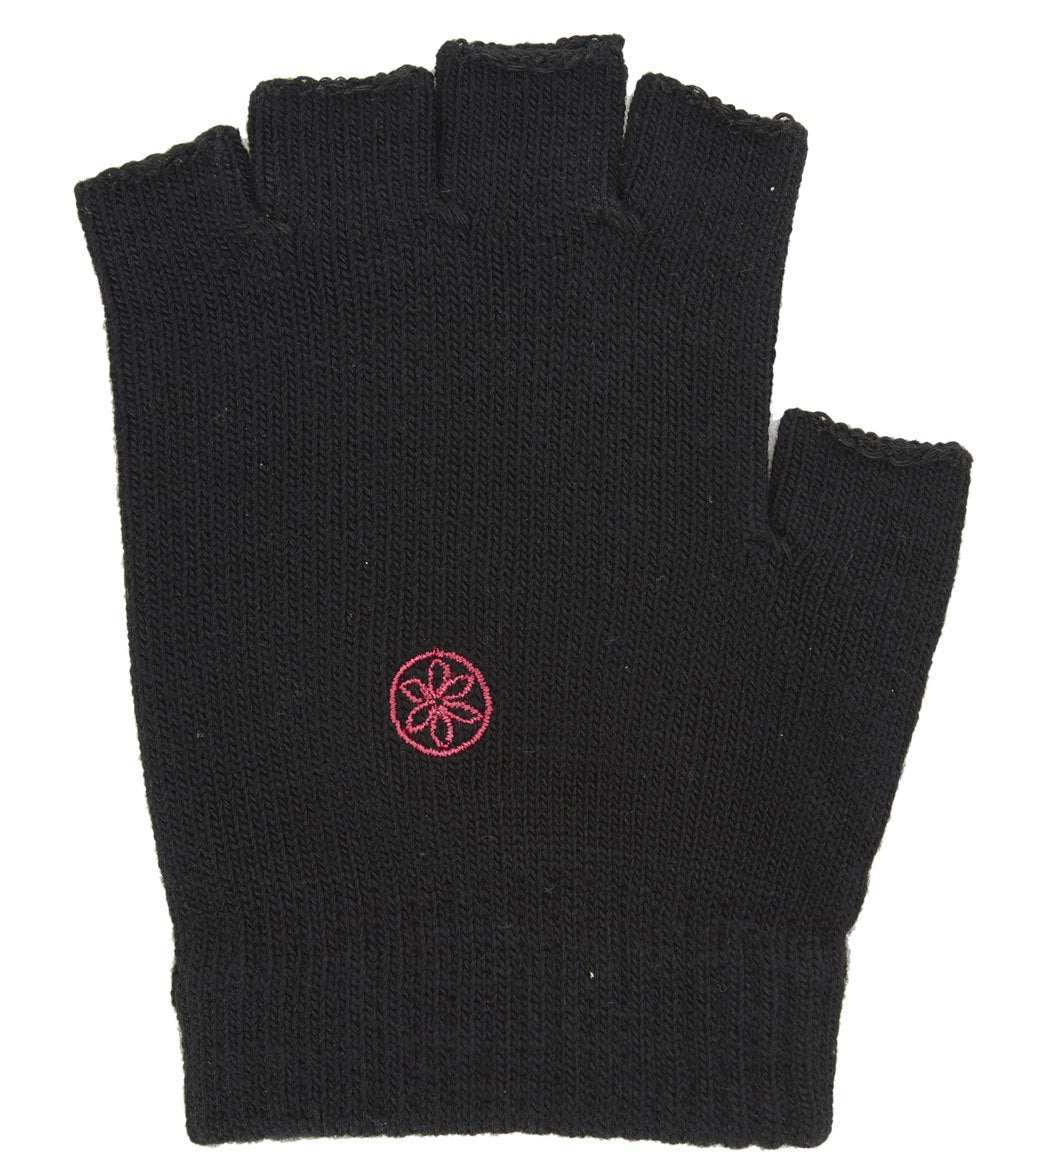 Gaiam Super Grippy Yoga Gloves With Pink Dots at